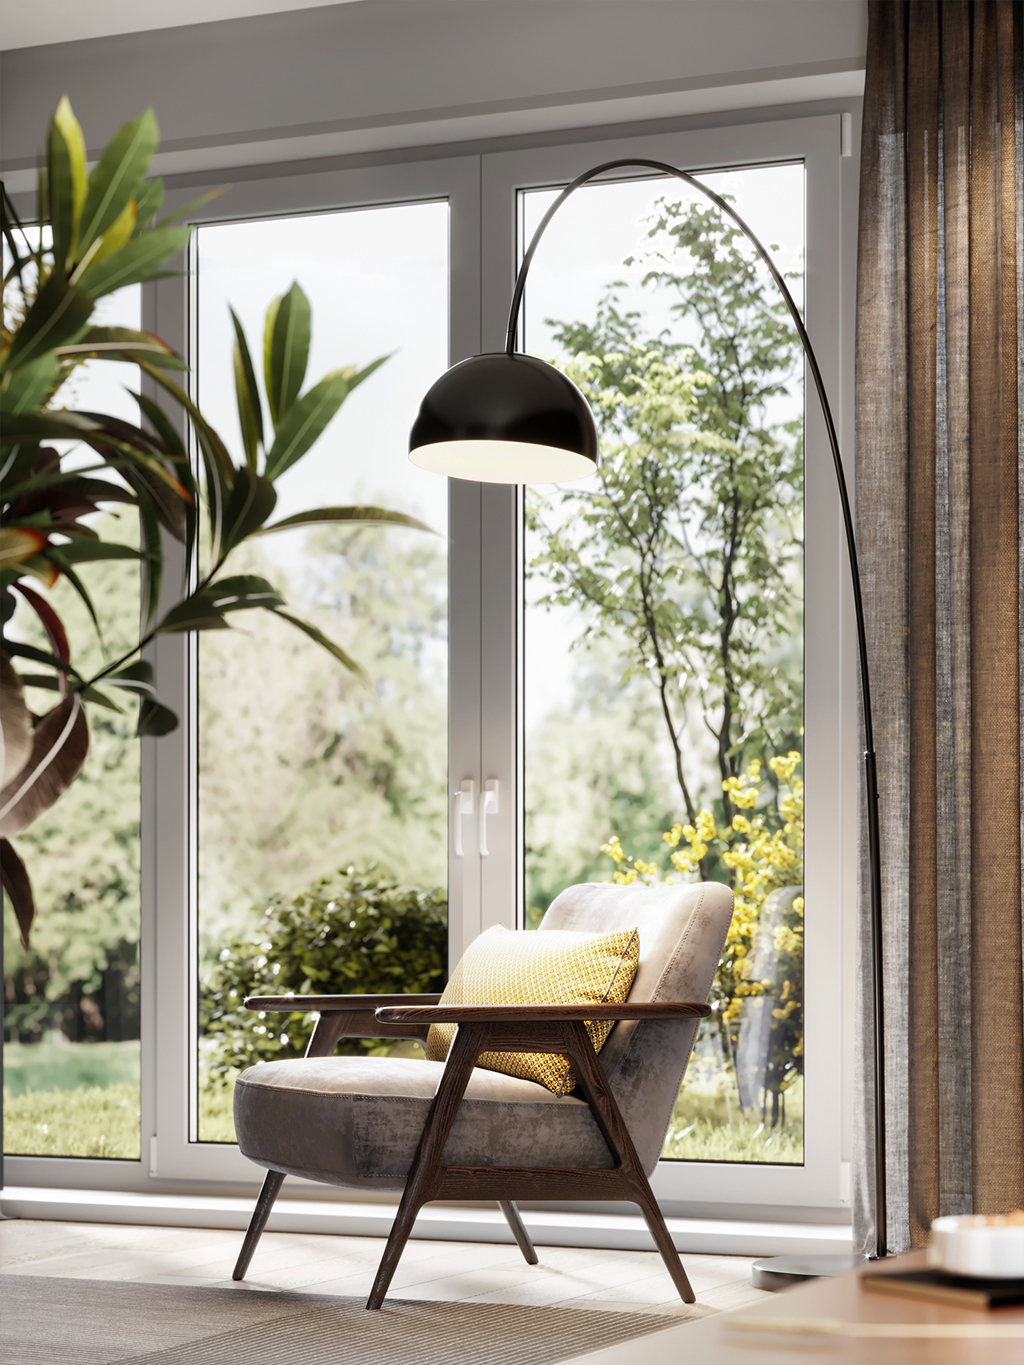 Get Energy Efficient Windows with Energy Window Solutions | Dallas, TX